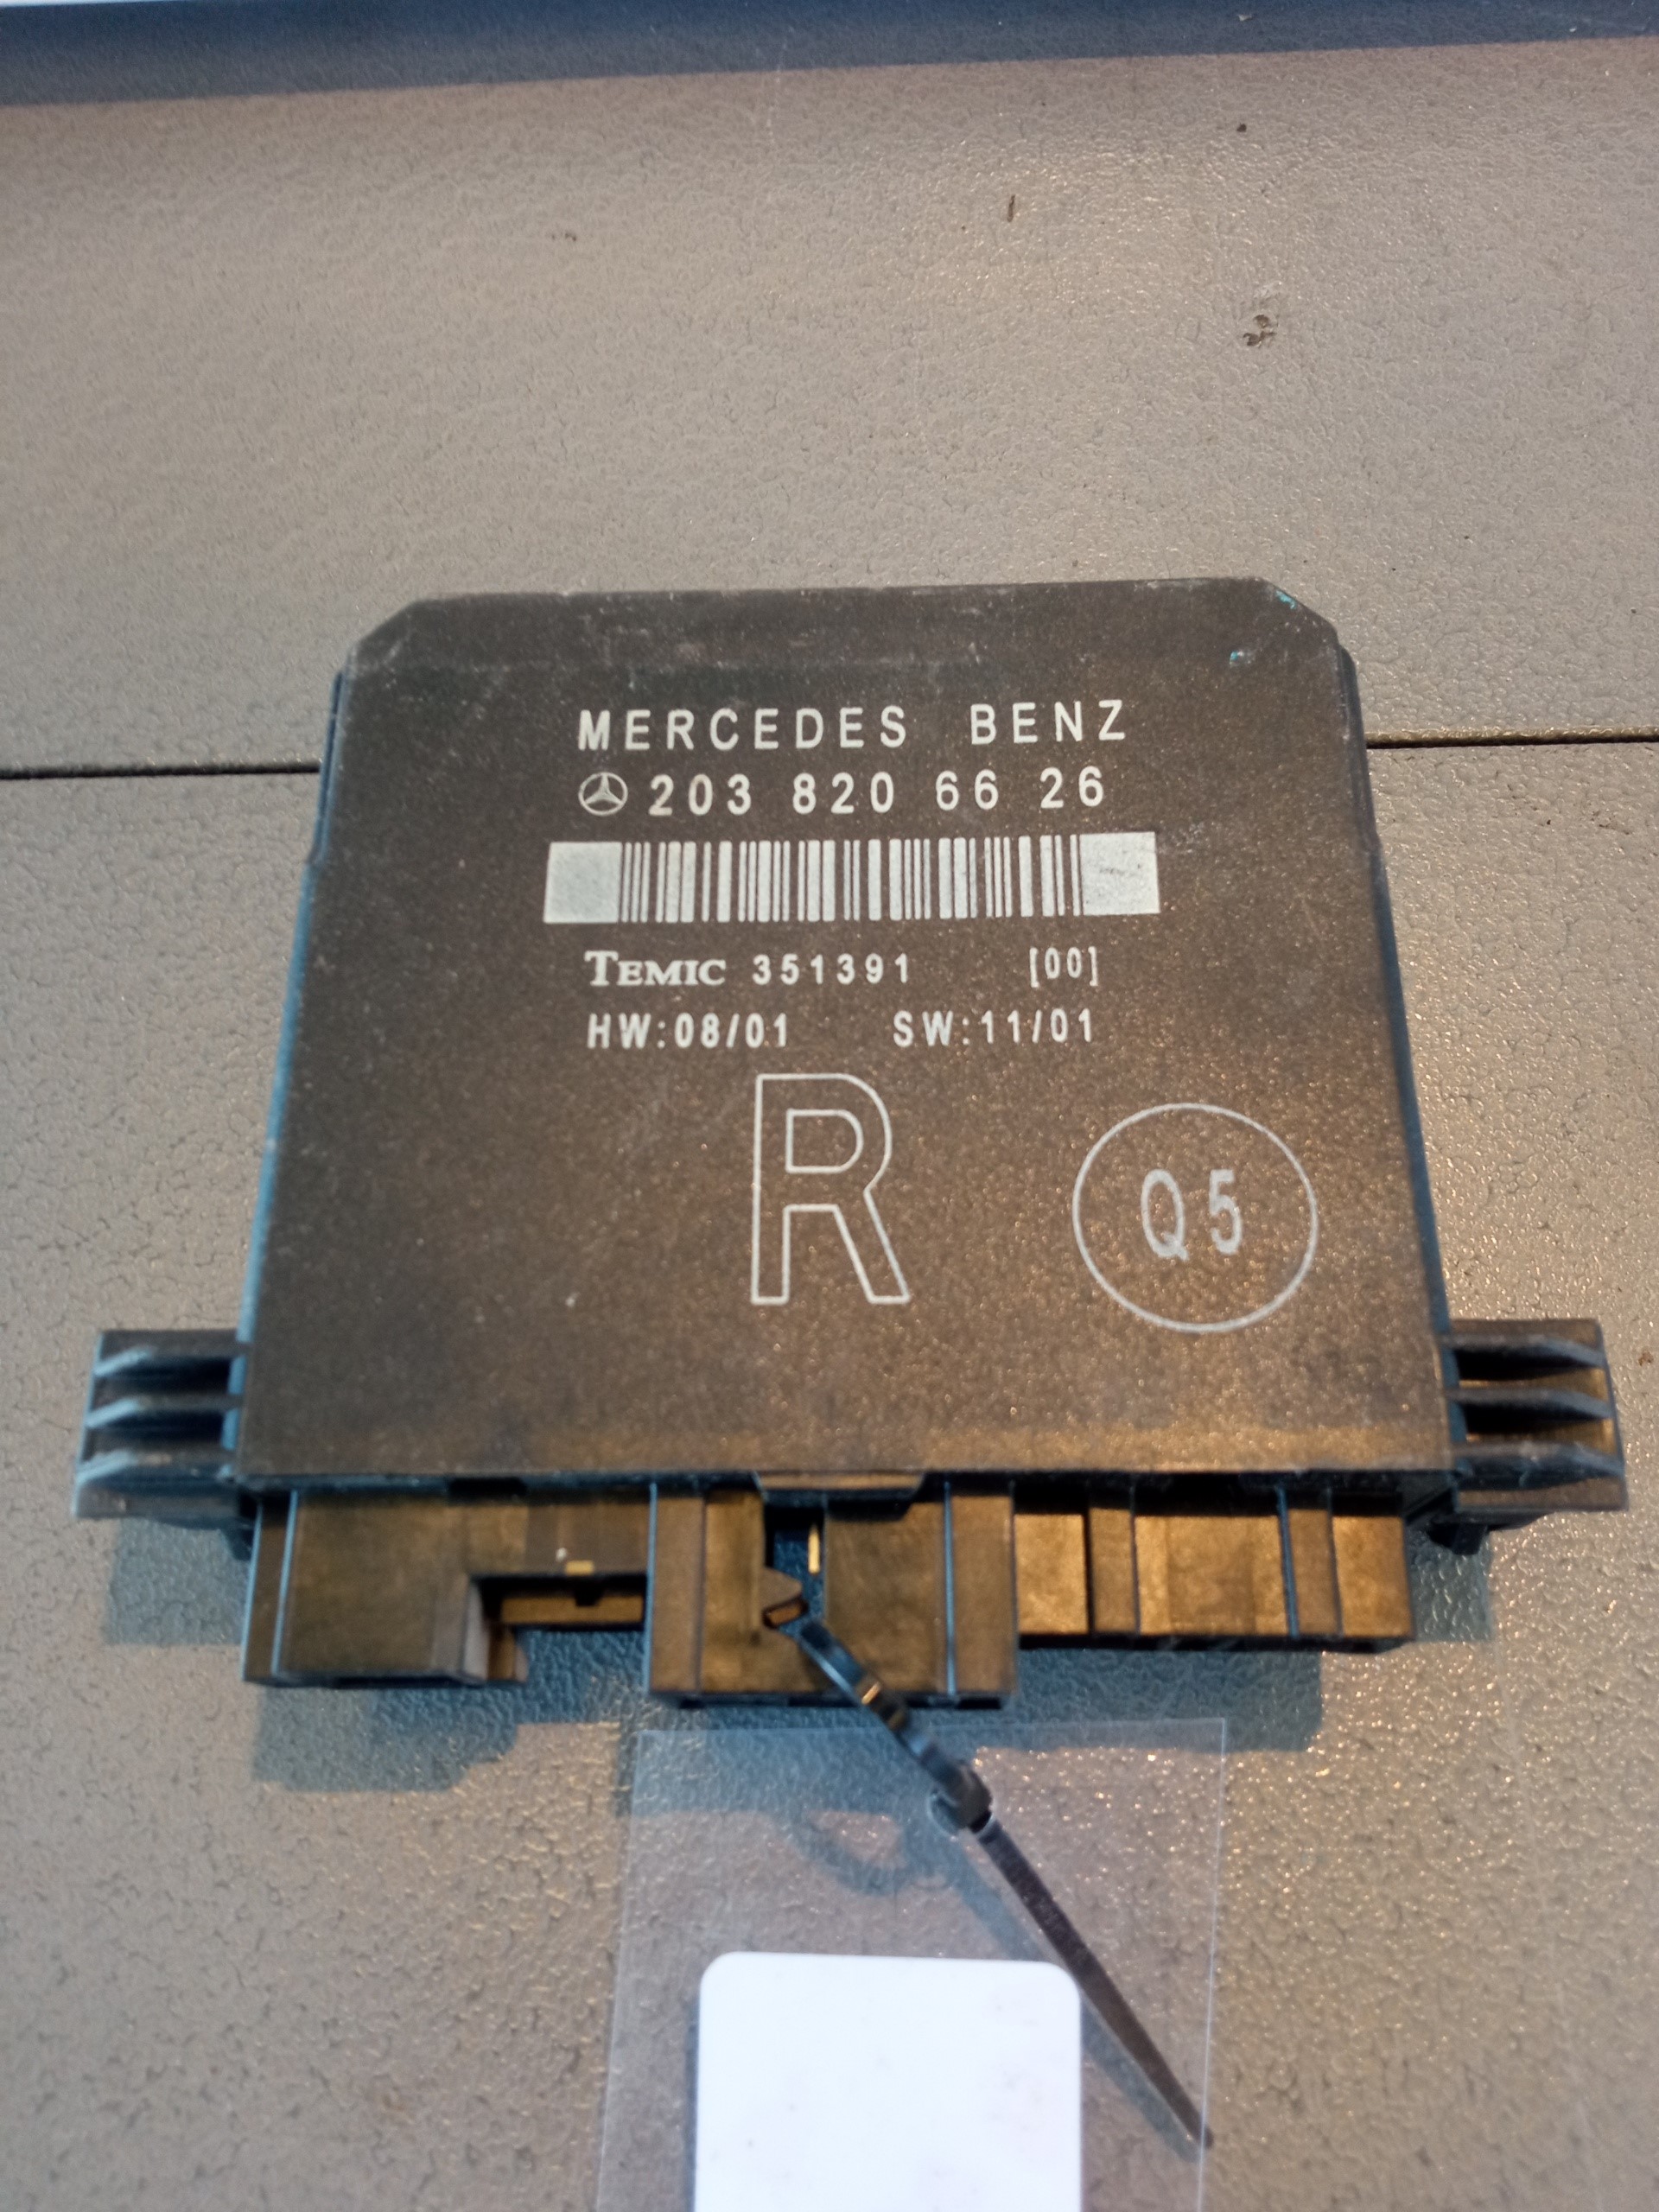 MERCEDES-BENZ C-Class W203/S203/CL203 (2000-2008) Other Control Units 2038206626, TRASERADERECHA 22386482